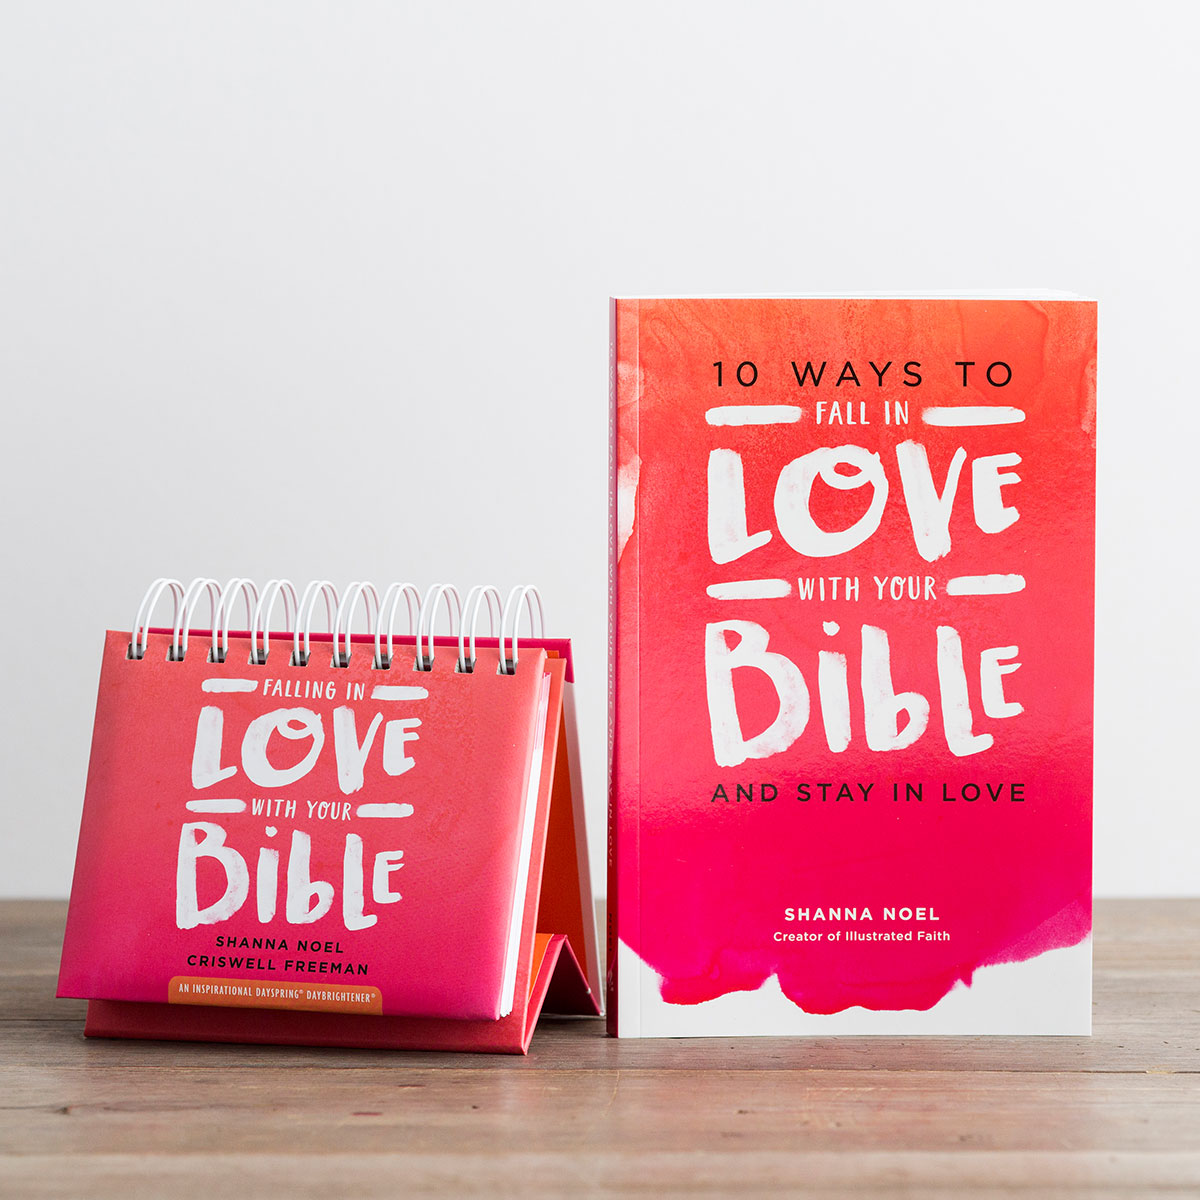 Shanna Noel - Falling in Love with Your Bible - Book & Perpetual Calendar Gift Set